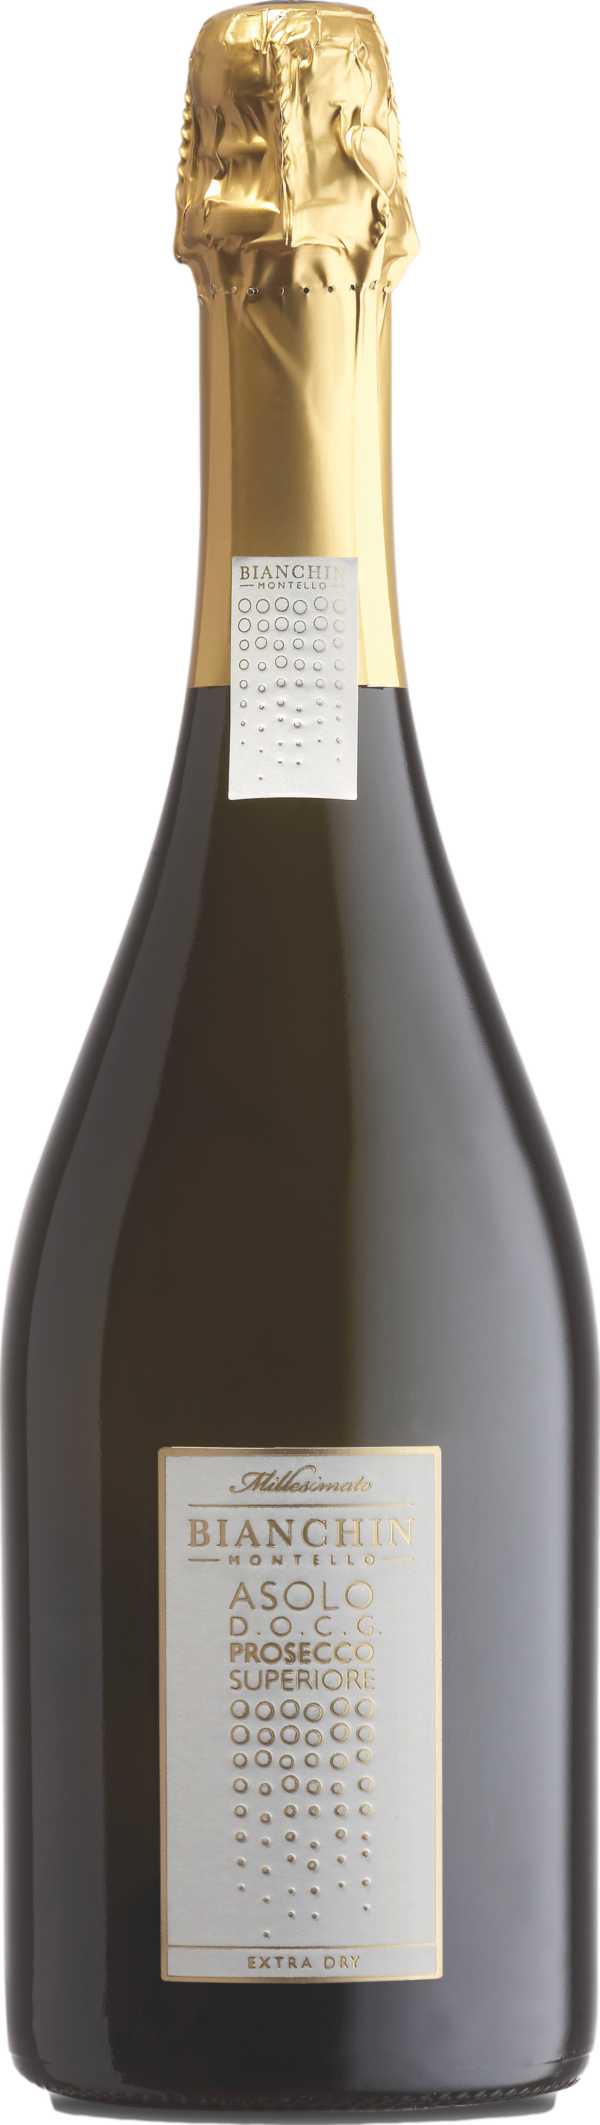 Product image of Bianchin Asolo Prosecco Superiore Extra Dry 2021 from 8wines